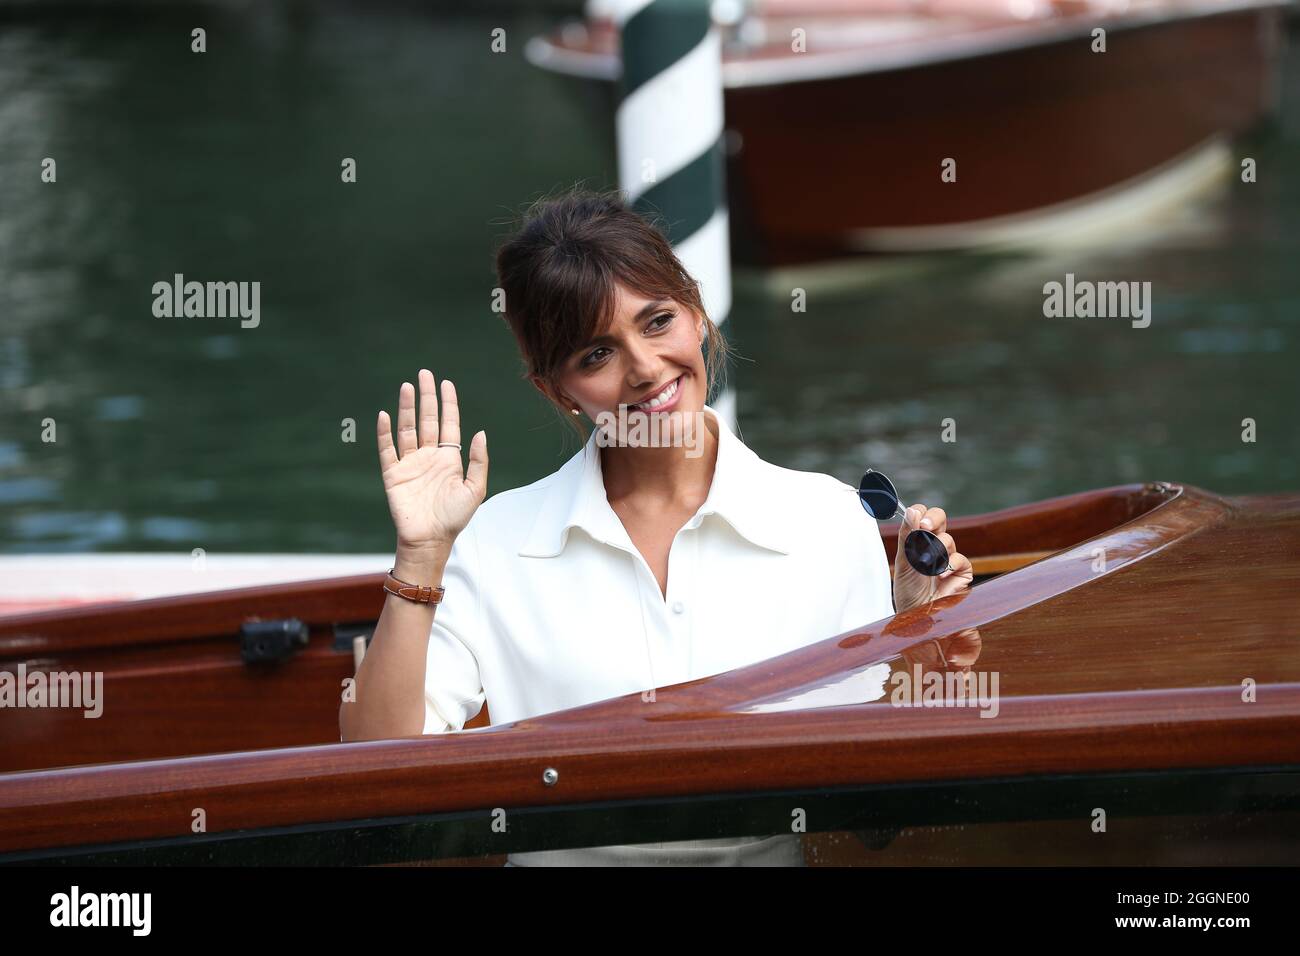 VENICE, ITALY - AUGUST 31: Serena Rossi is seen arriving at the 78th Venice International Film Festival on August 31, 2021 in Venice, Italy. (Photo by Mark Cape/Insidefoto) Stock Photo